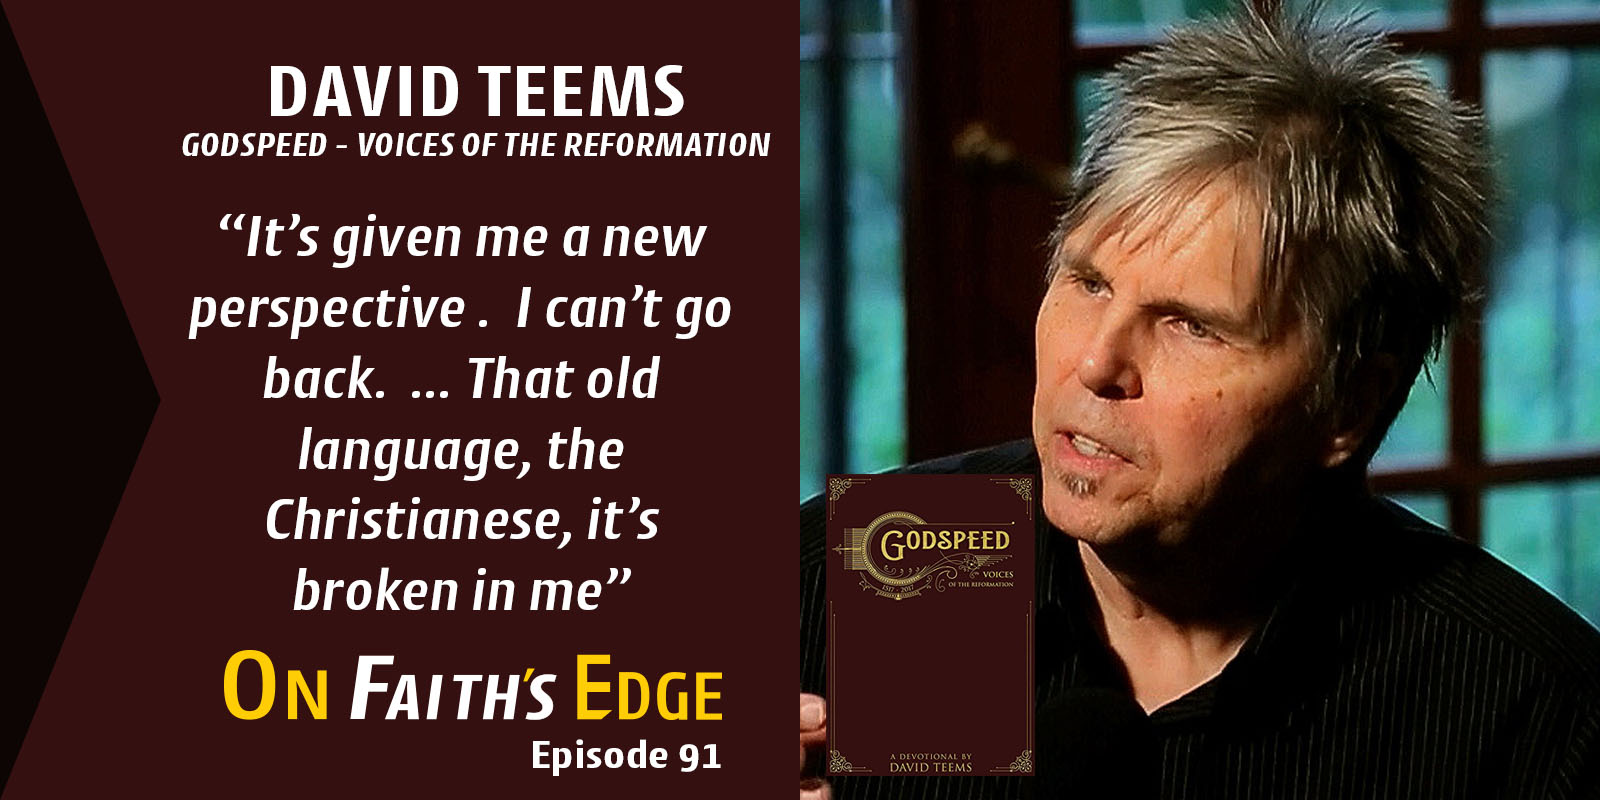 Being Reformed by The Reformation – Author of GODSPEED, David Teems | Episode 91